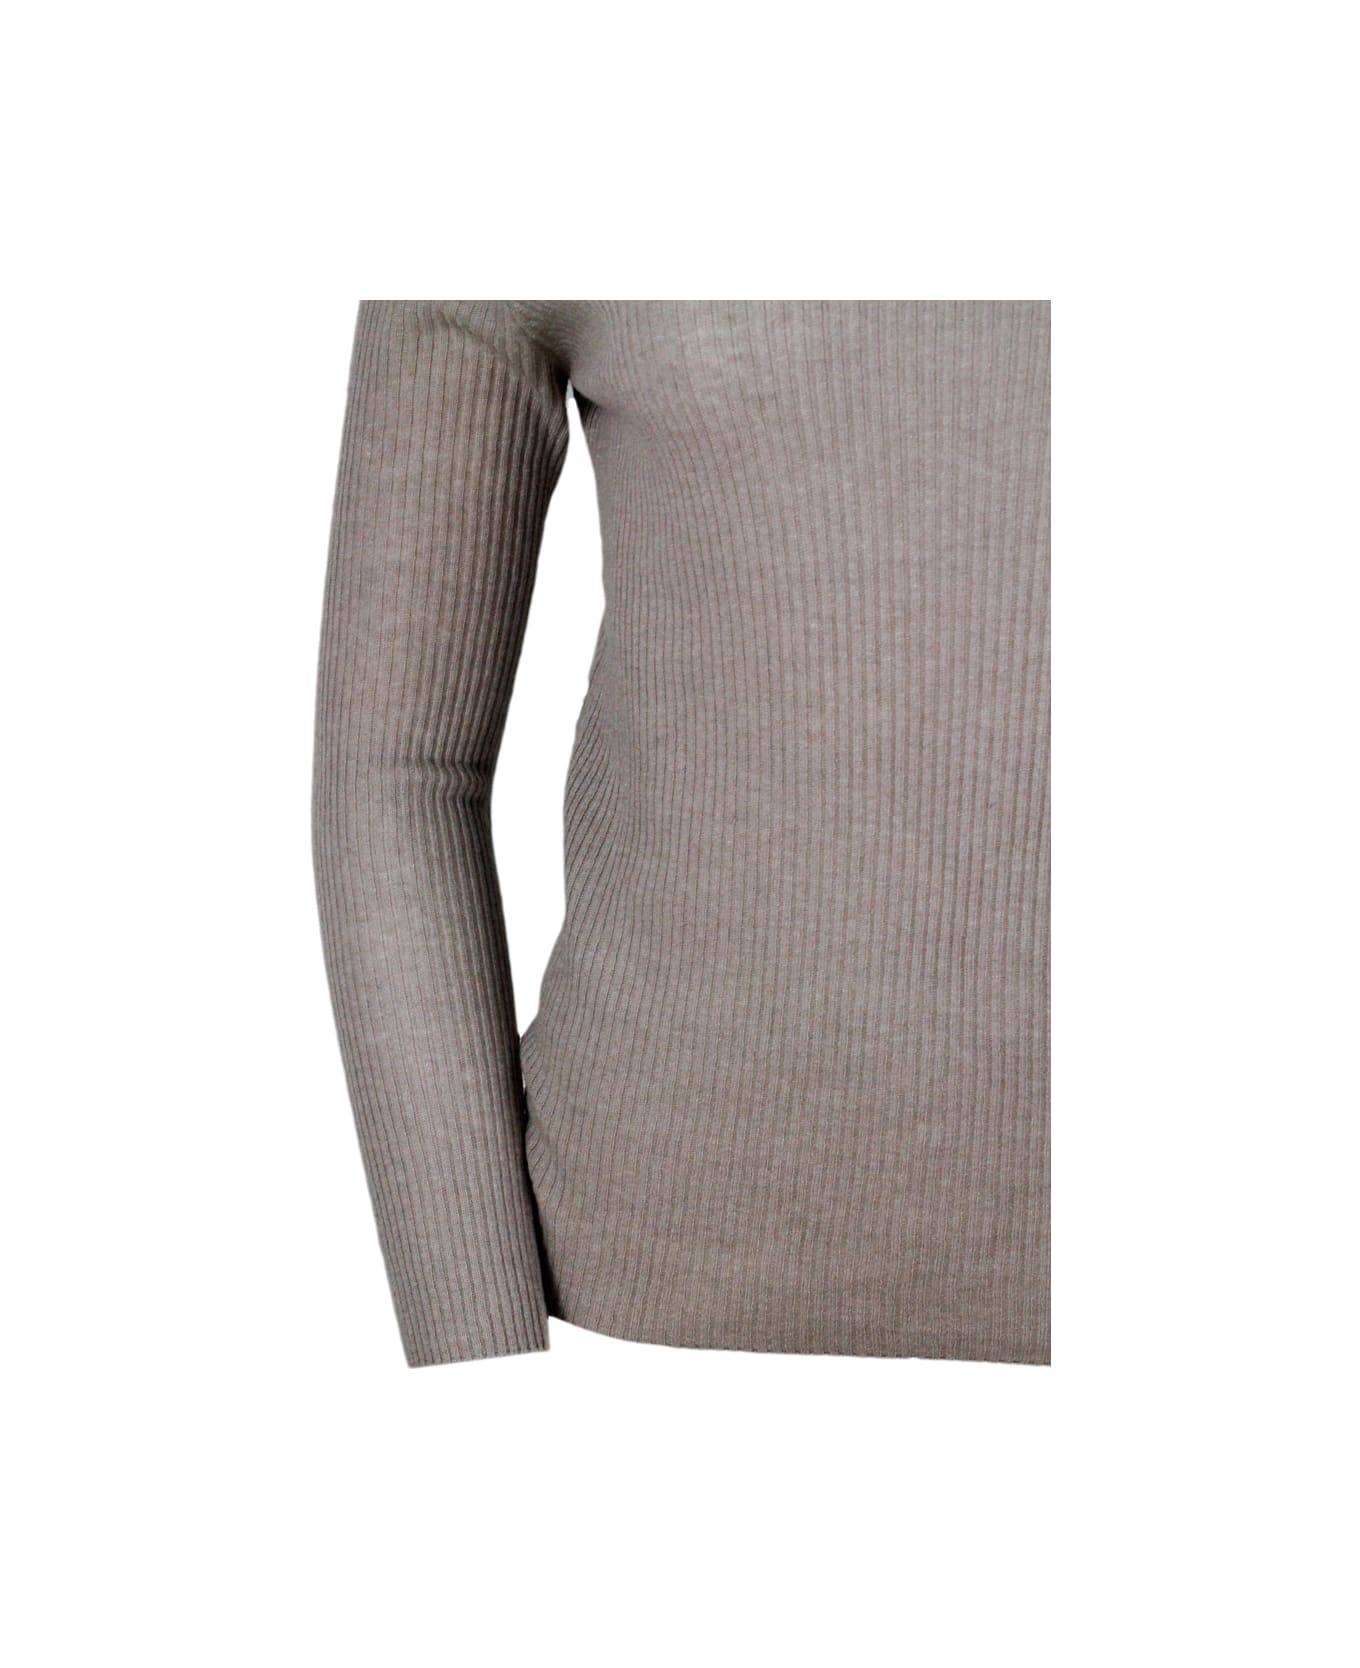 Fabiana Filippi Lightweight Turtleneck Long-sleeved Sweater In Soft And Fine Wool, Silk And Cashmere With Small Rib Knit - Nut